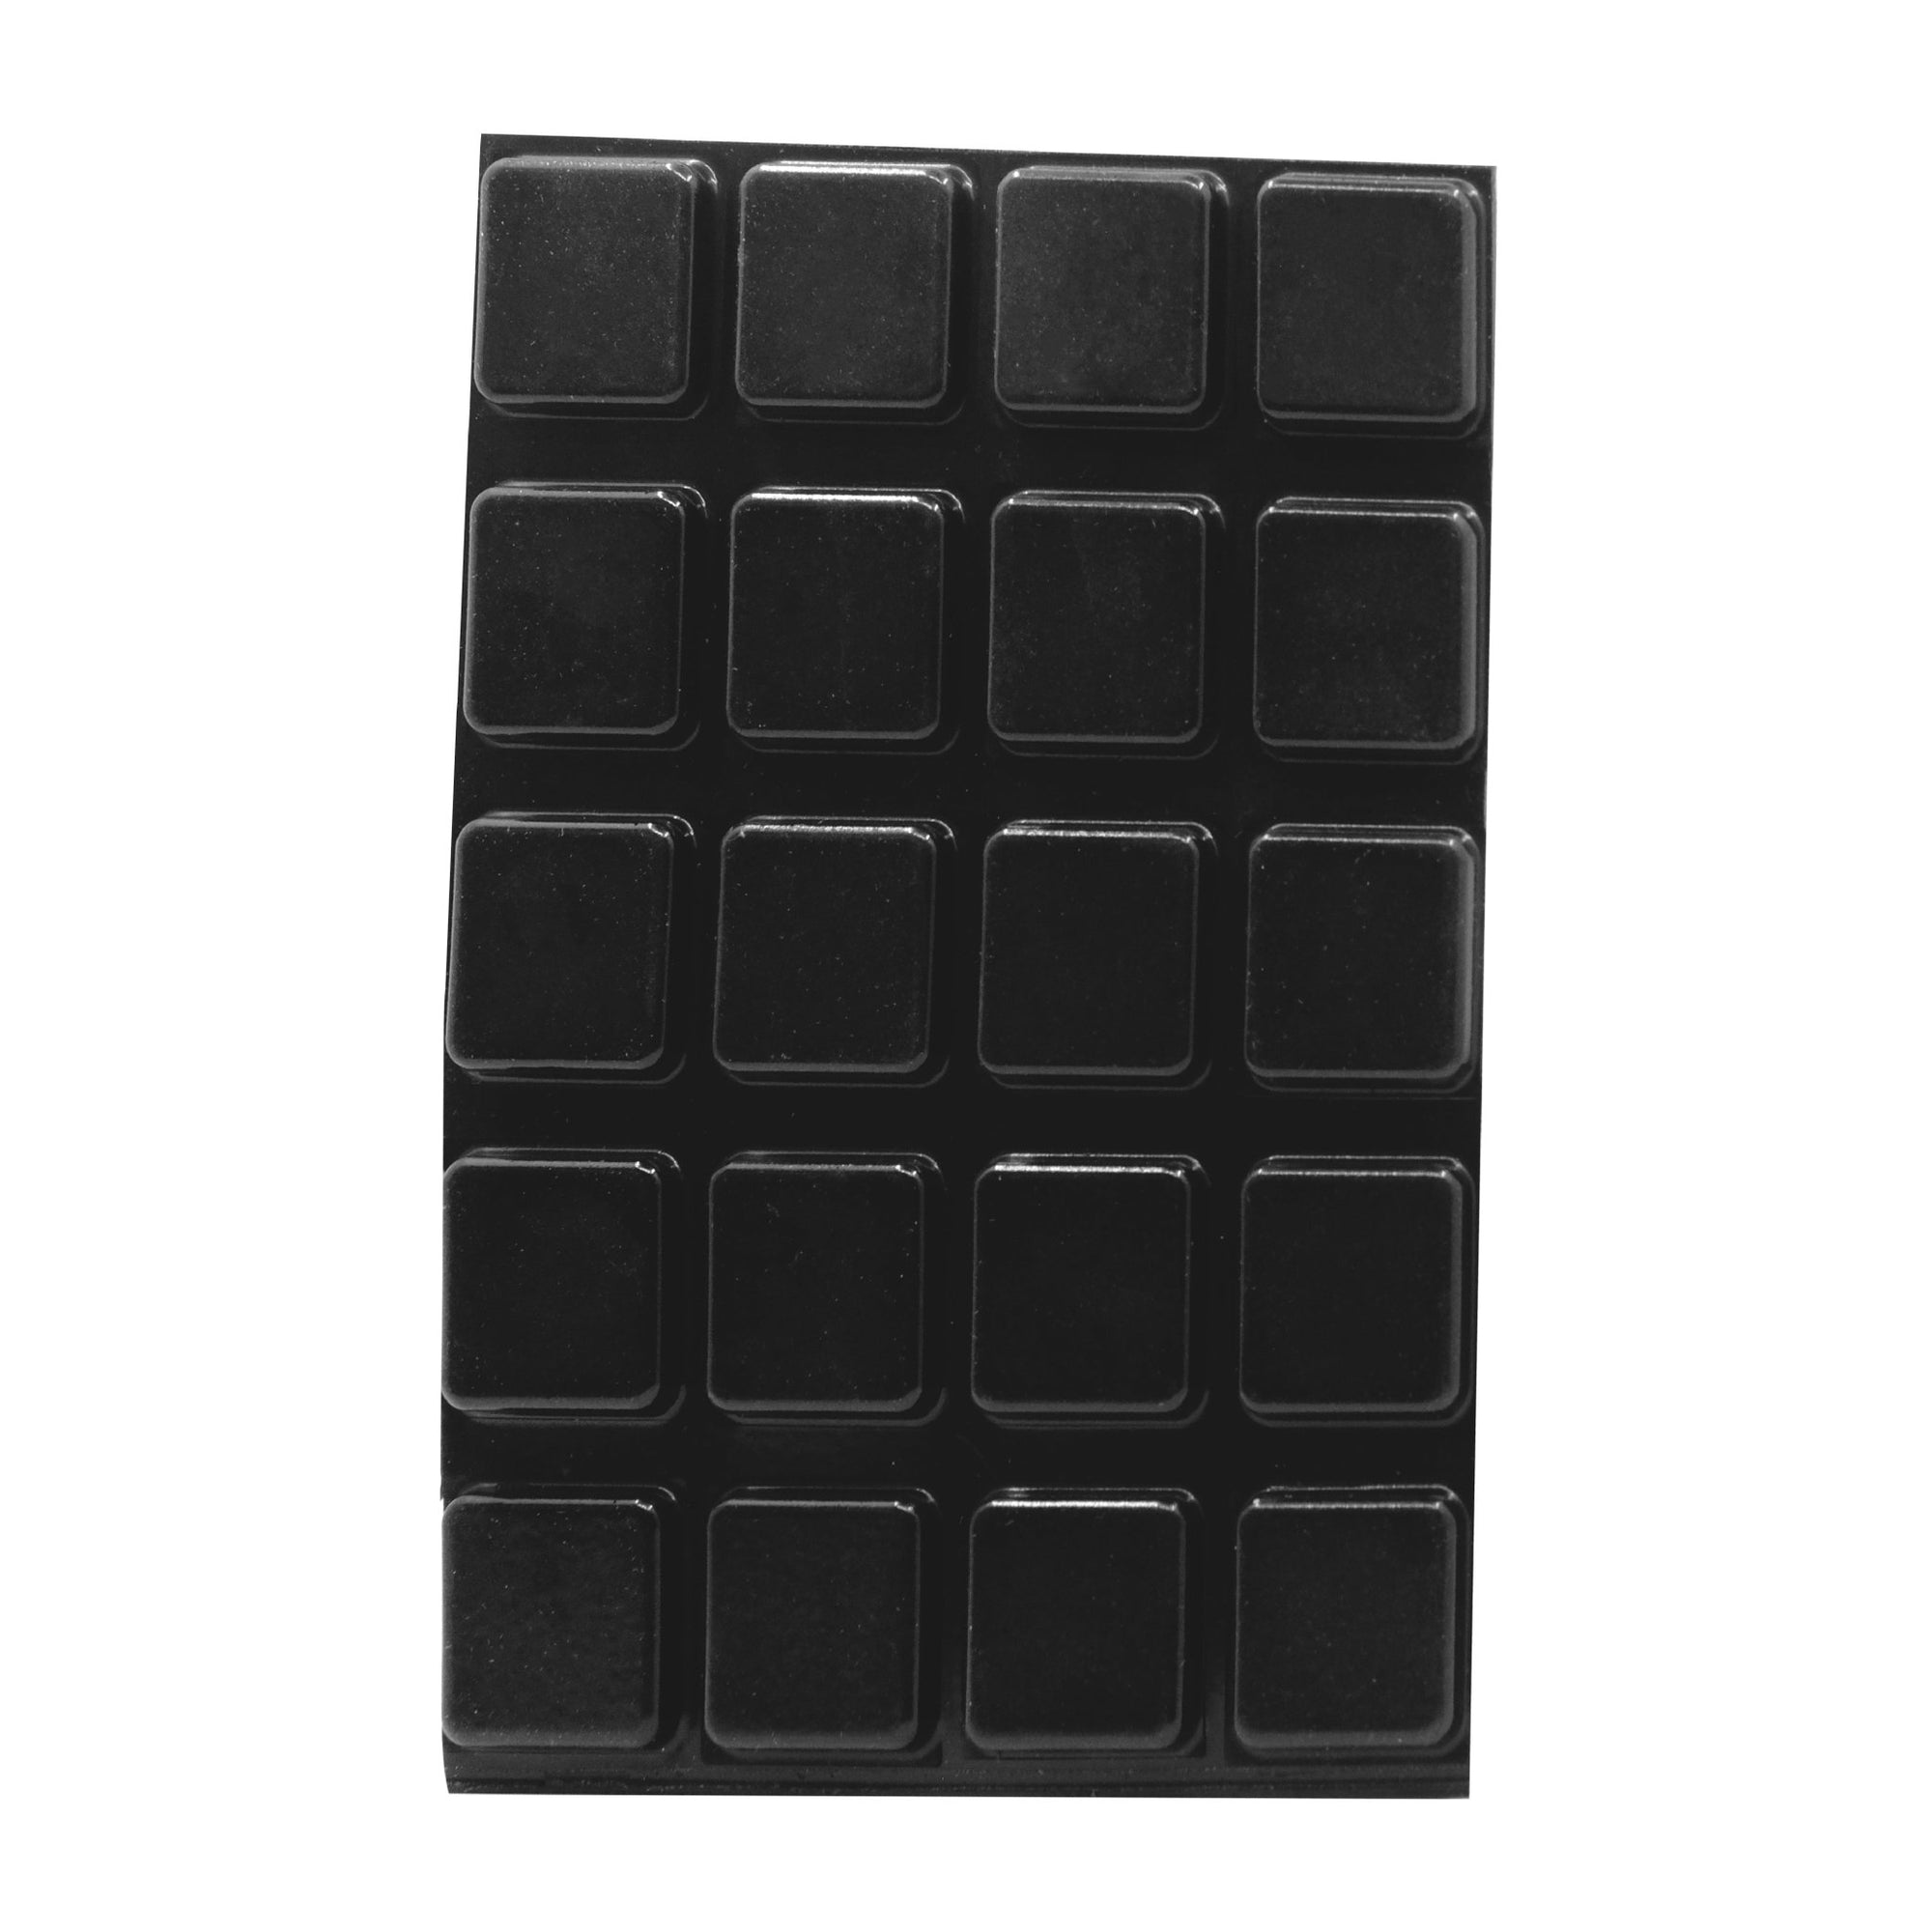 1 Inch Square .1875" Height Black Adhesive Rubber Feet - BMP-SQ1BC - Picture Hang Solutions